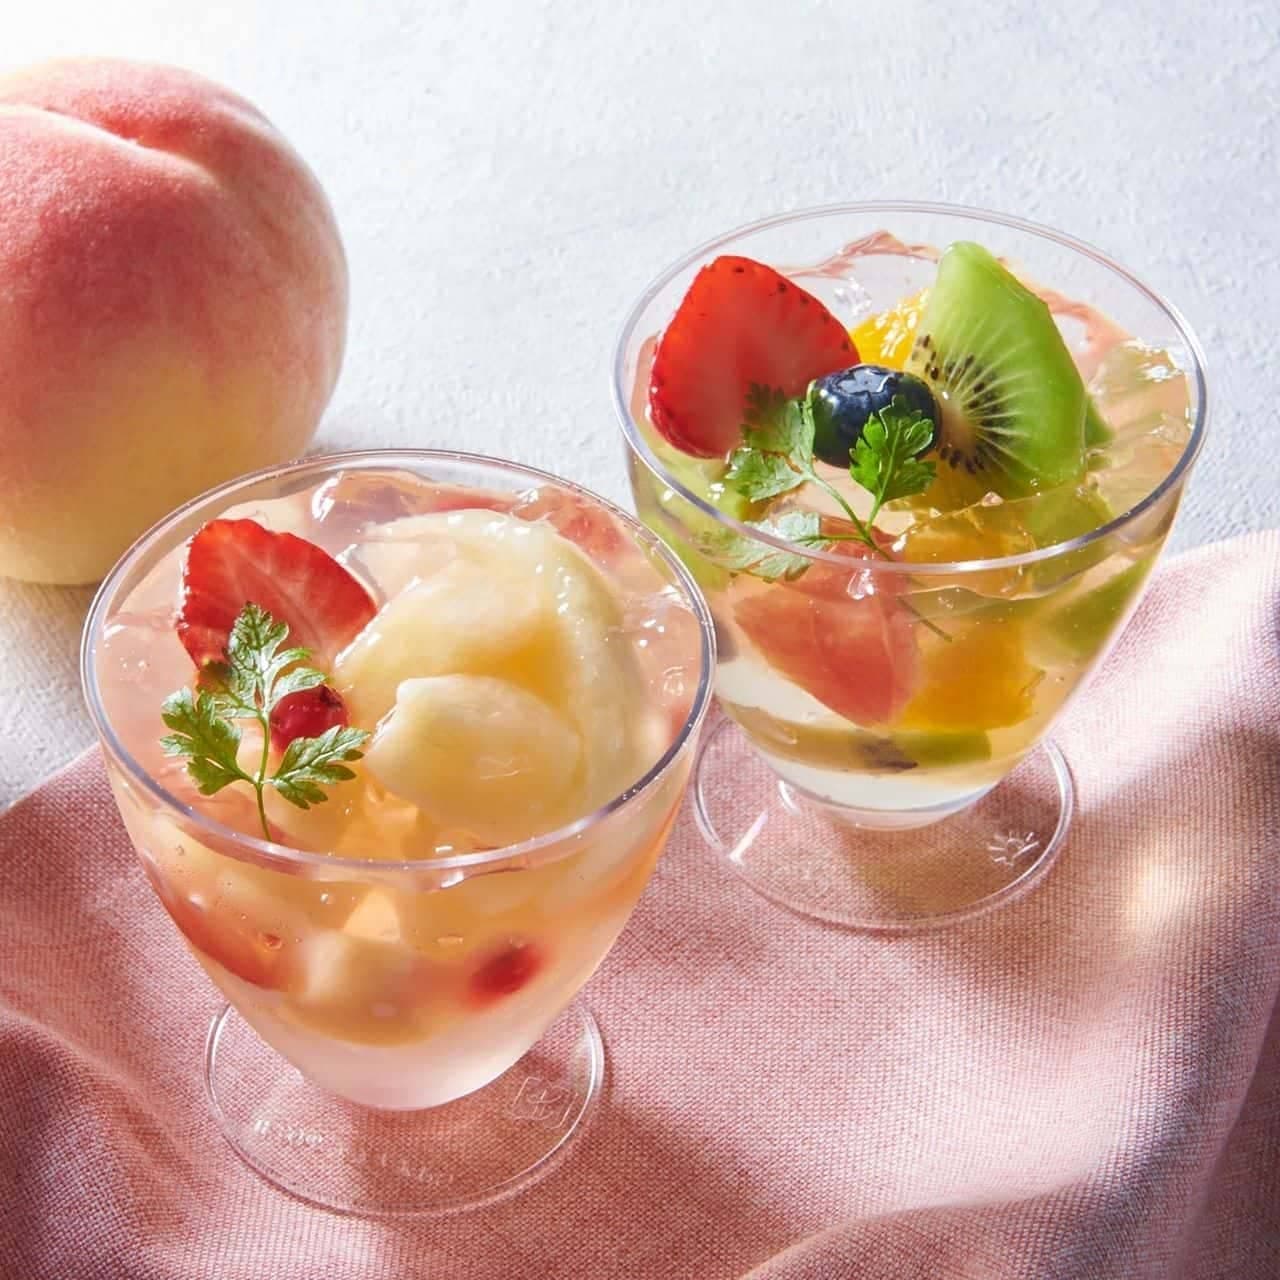 Shateraise "Cocktail Glass Joule: White Peaches and Strawberries/Mixed Fruits from Yamanashi Prefecture".